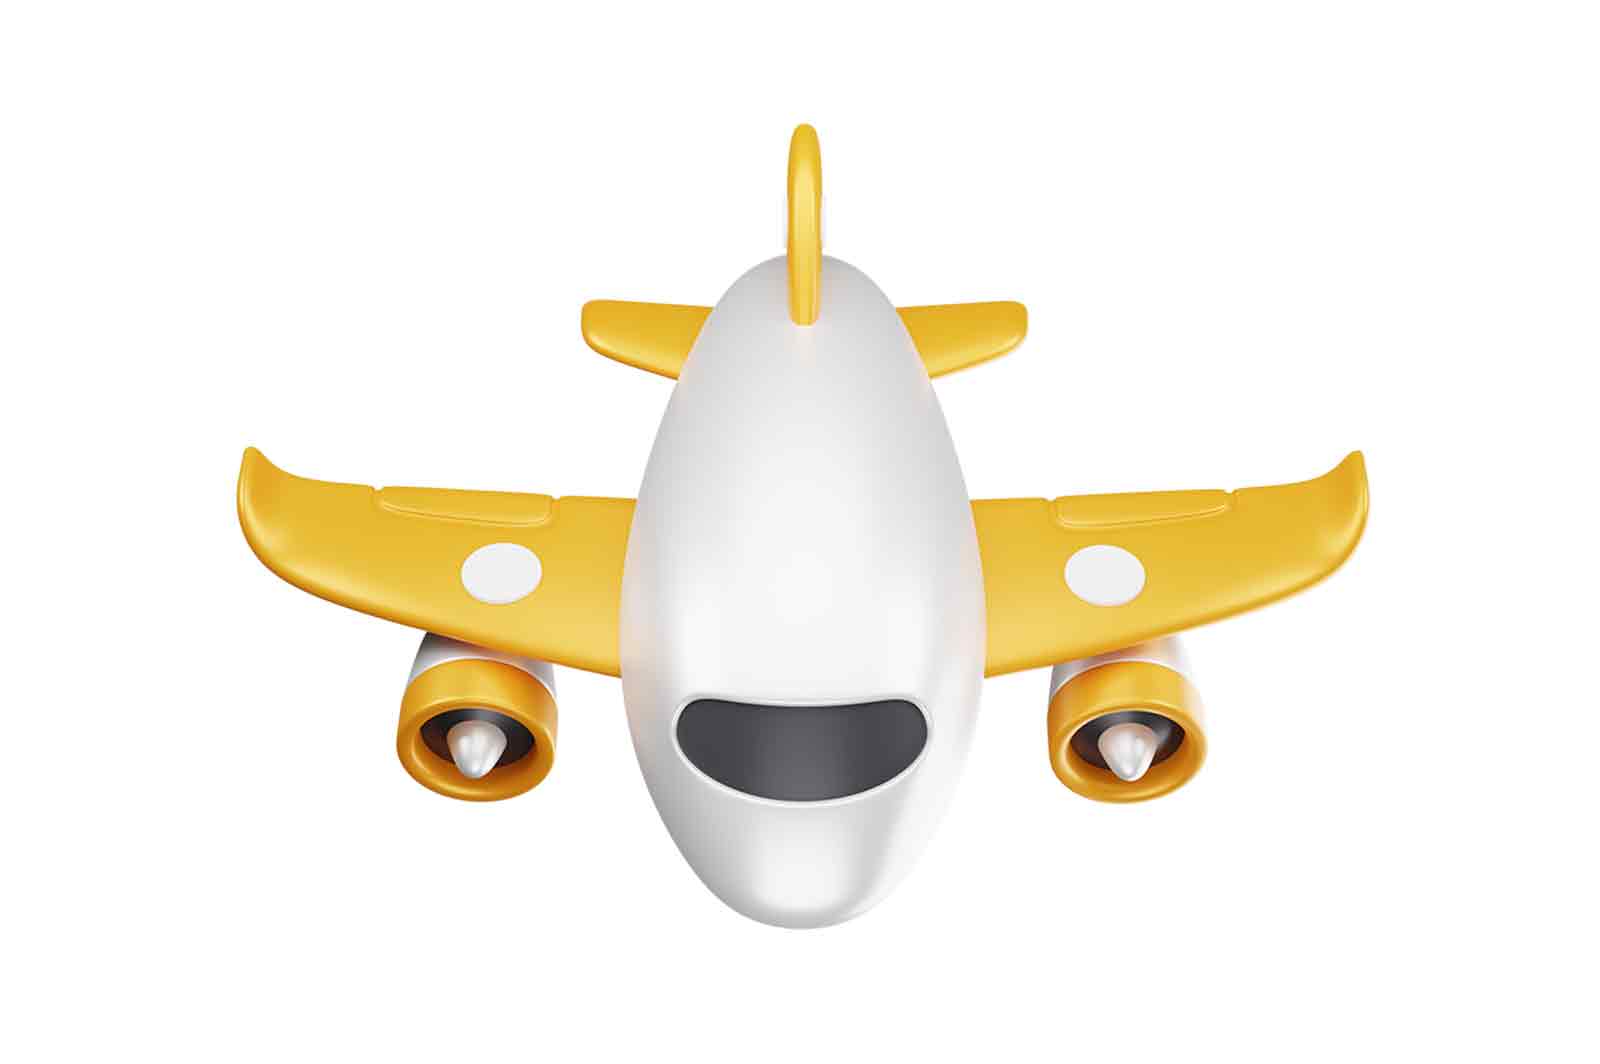 White and yellow airplane 3d rendered icon illustration. Plane or passenger aeroplane. Civil aviation transport concept